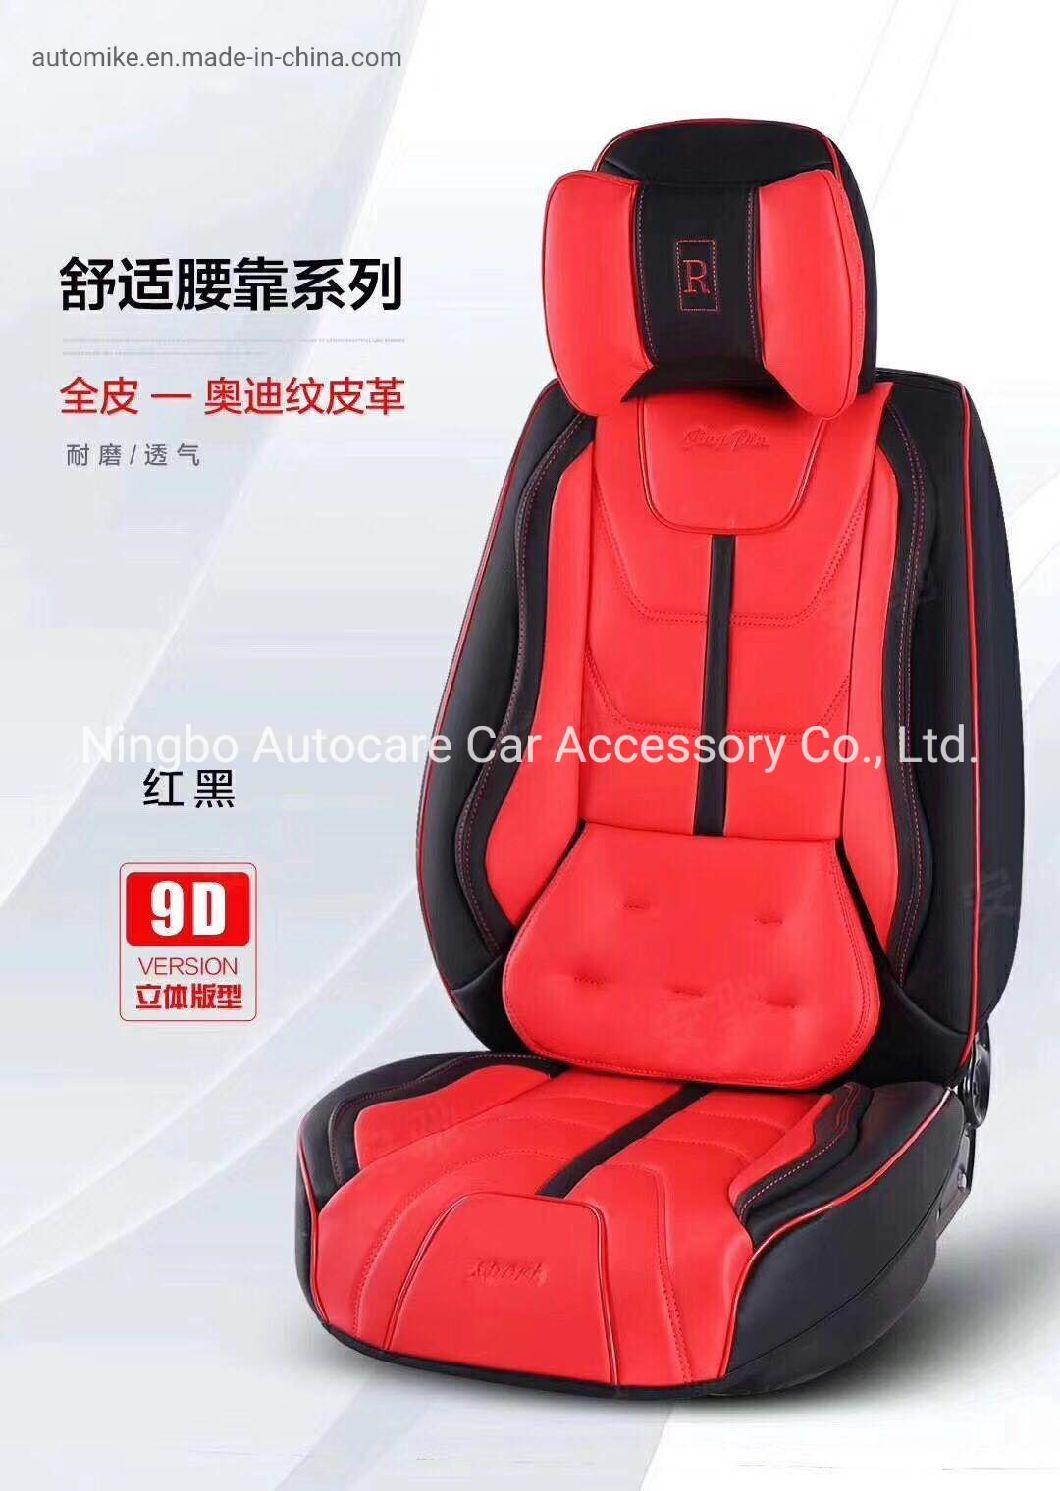 Car Accessories Car Decoration Car Seat Cushion Universal Full Covered PVC Leather Auto Car Seat Cover